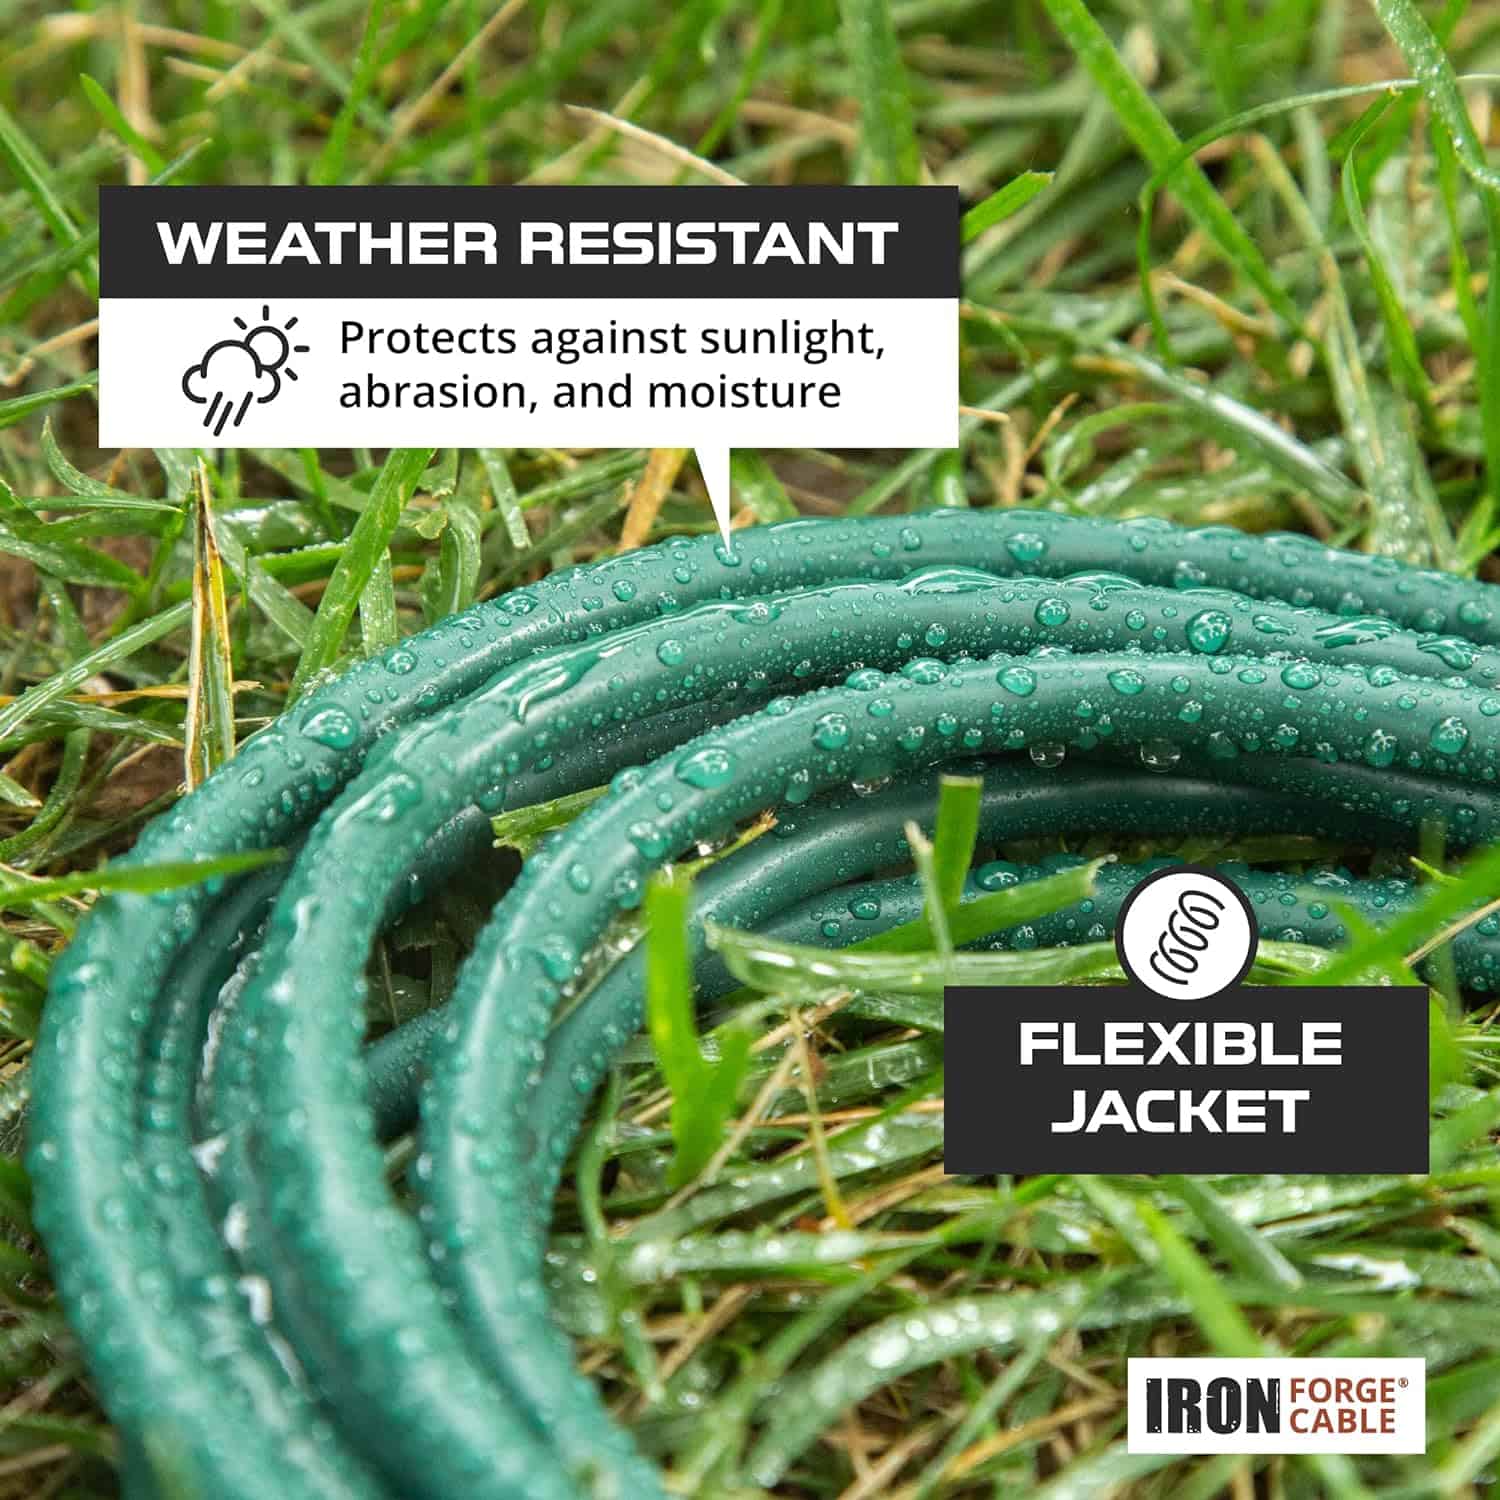 Iron Forge Cable Green Outdoor Extension Cord 25 Ft, 16 3 Green 25 Foot Extension Cord Indoor Outdoor Use 3 Prong Weatherproof Jacket Extension Cord 4